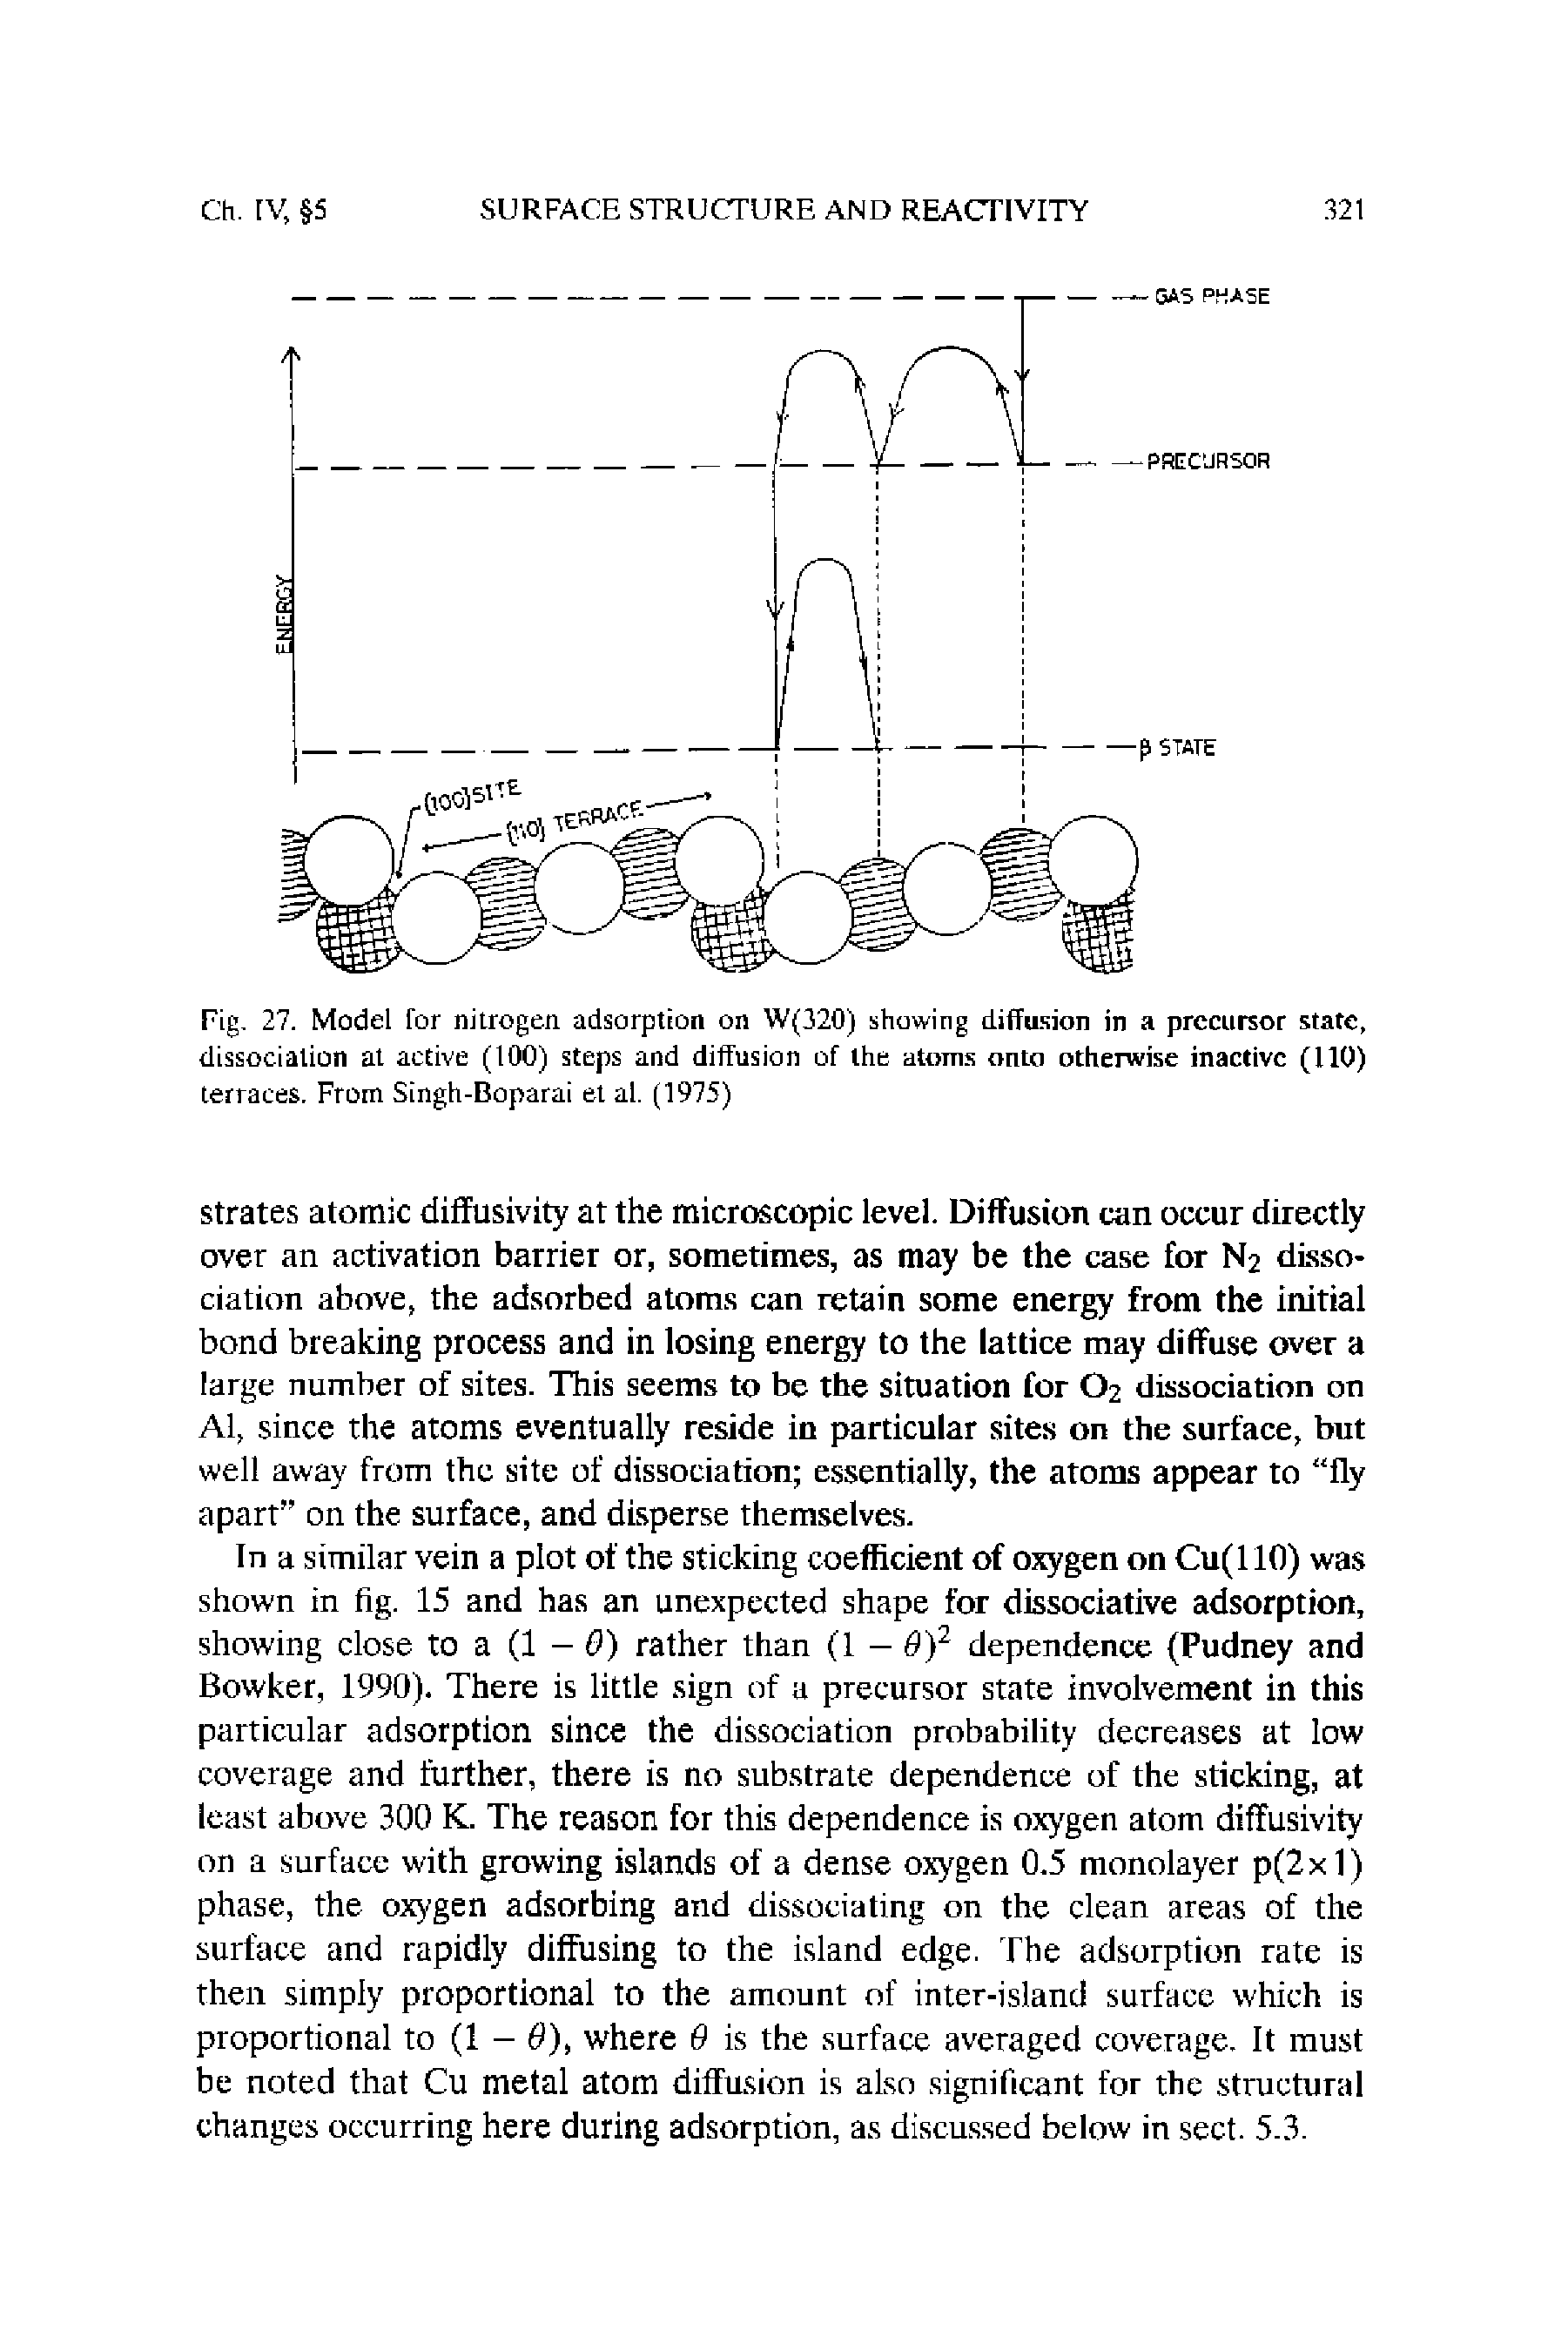 Fig. 27. Model Tor nitrogen adsorption on W(320) showing diffusion in a precursor state, dissociation at active (100) steps and diffusion of the atoms onto otherwise inactive (110) terraces. From Singh-Boparai et al. (1975)...